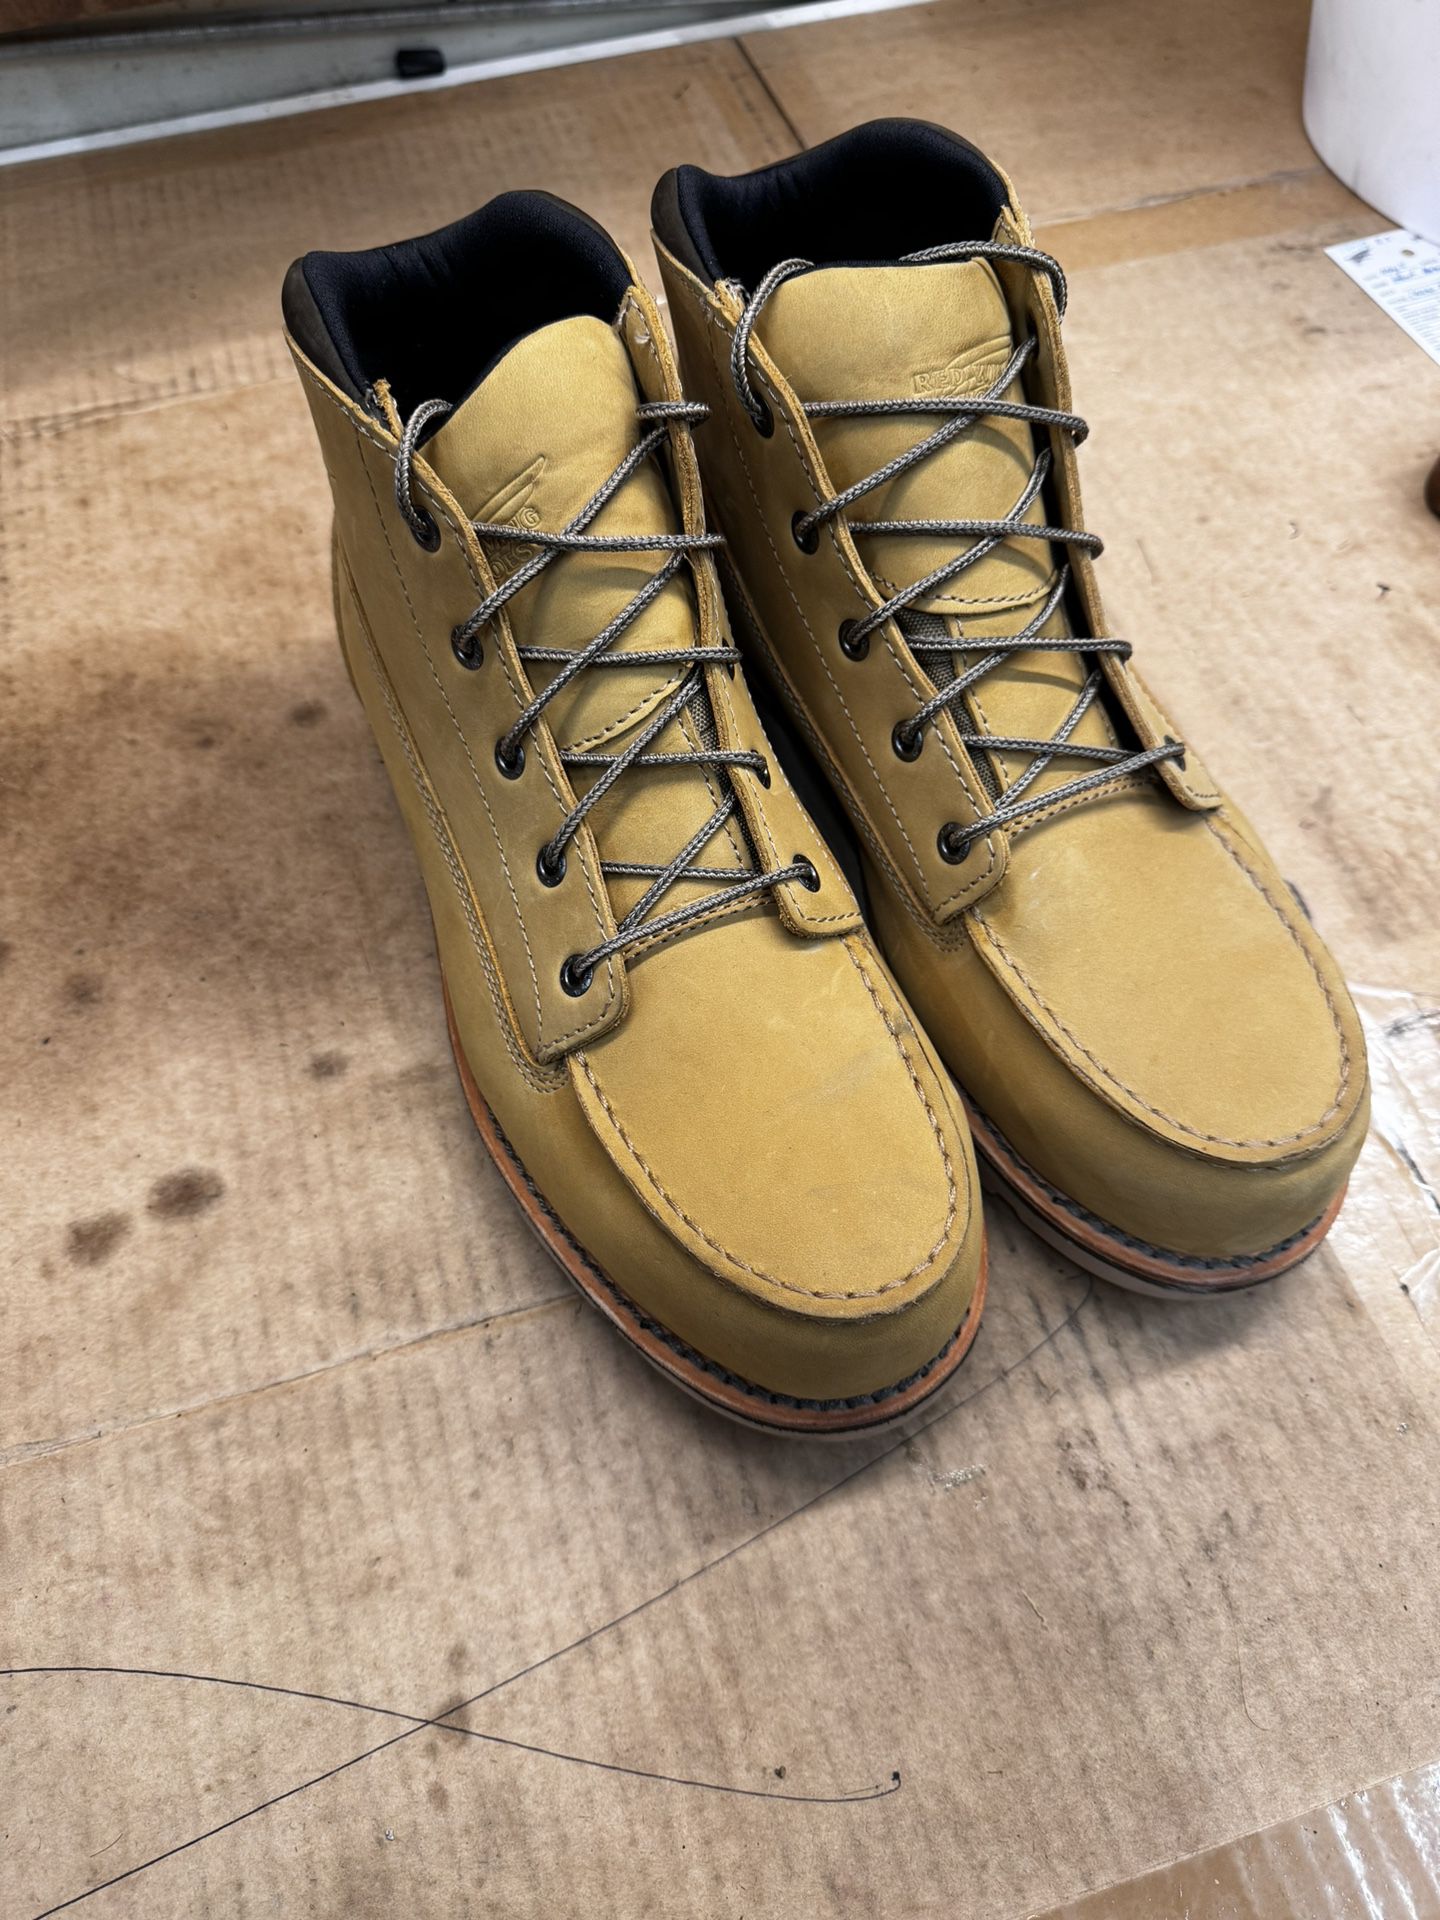 Red wing work boots 